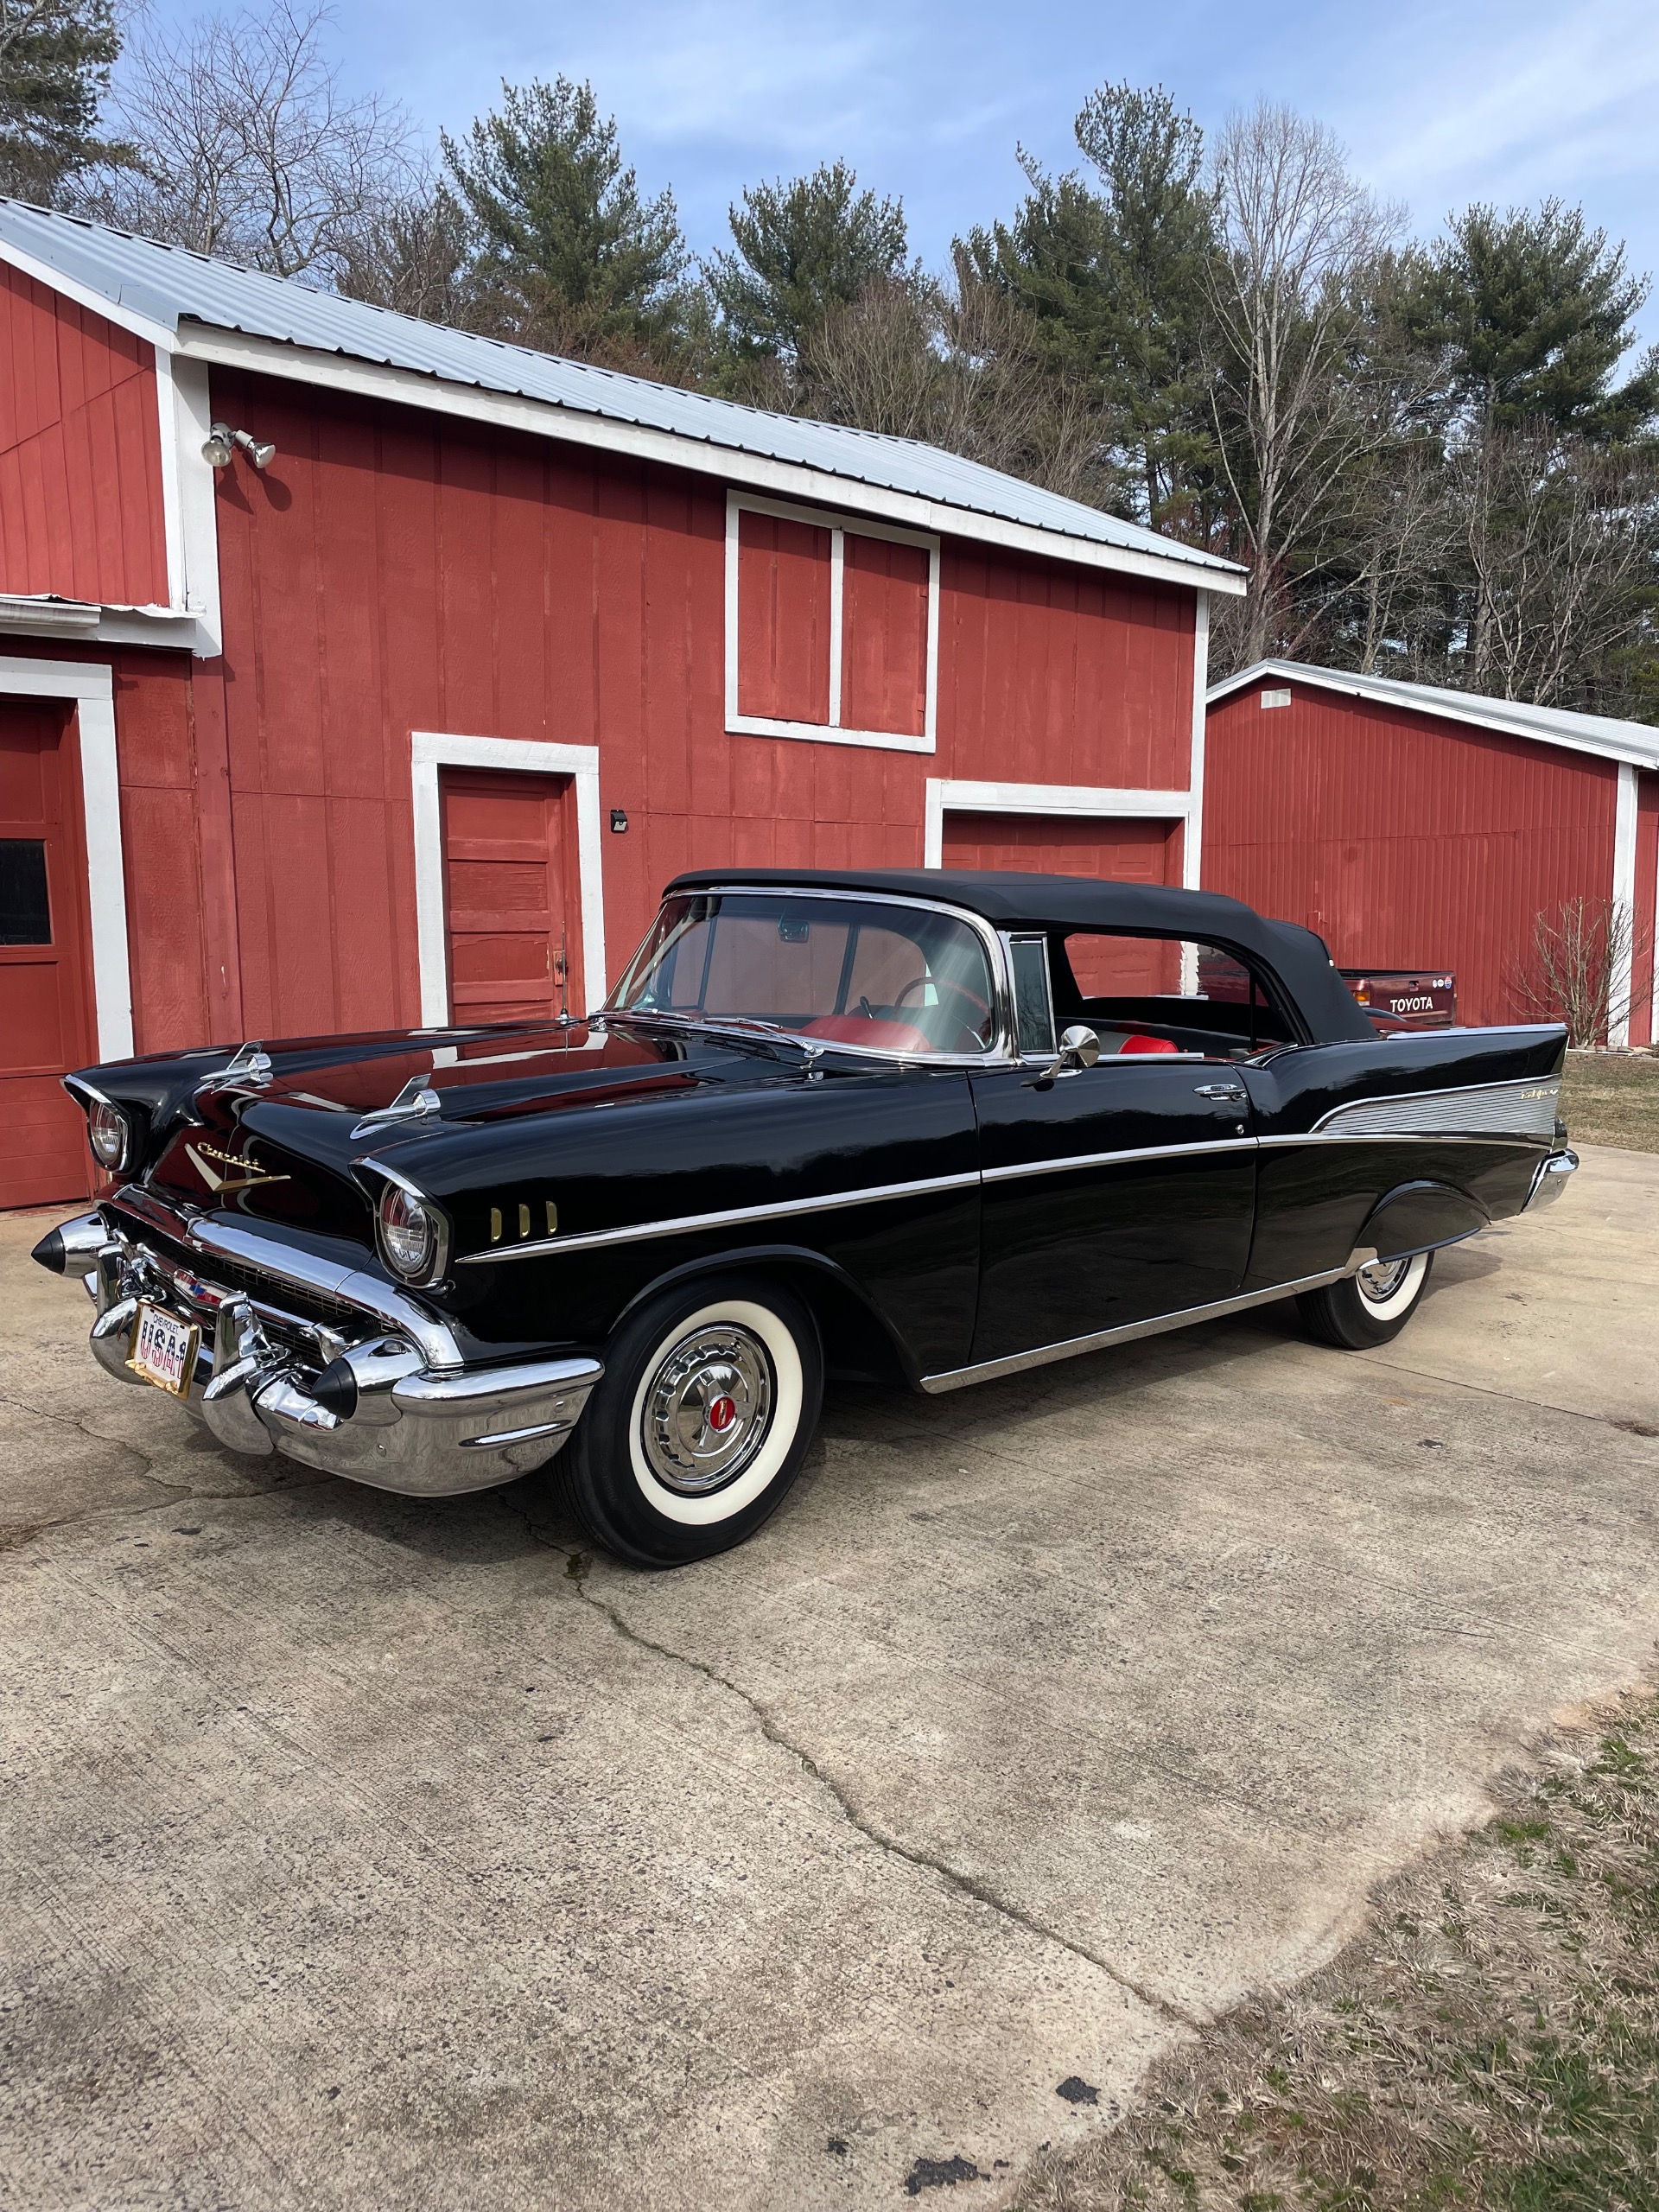 Used 1957 Chevrolet Bel Air Convertible  265 , For Sale $89000, Call Us: (704) 996-3735